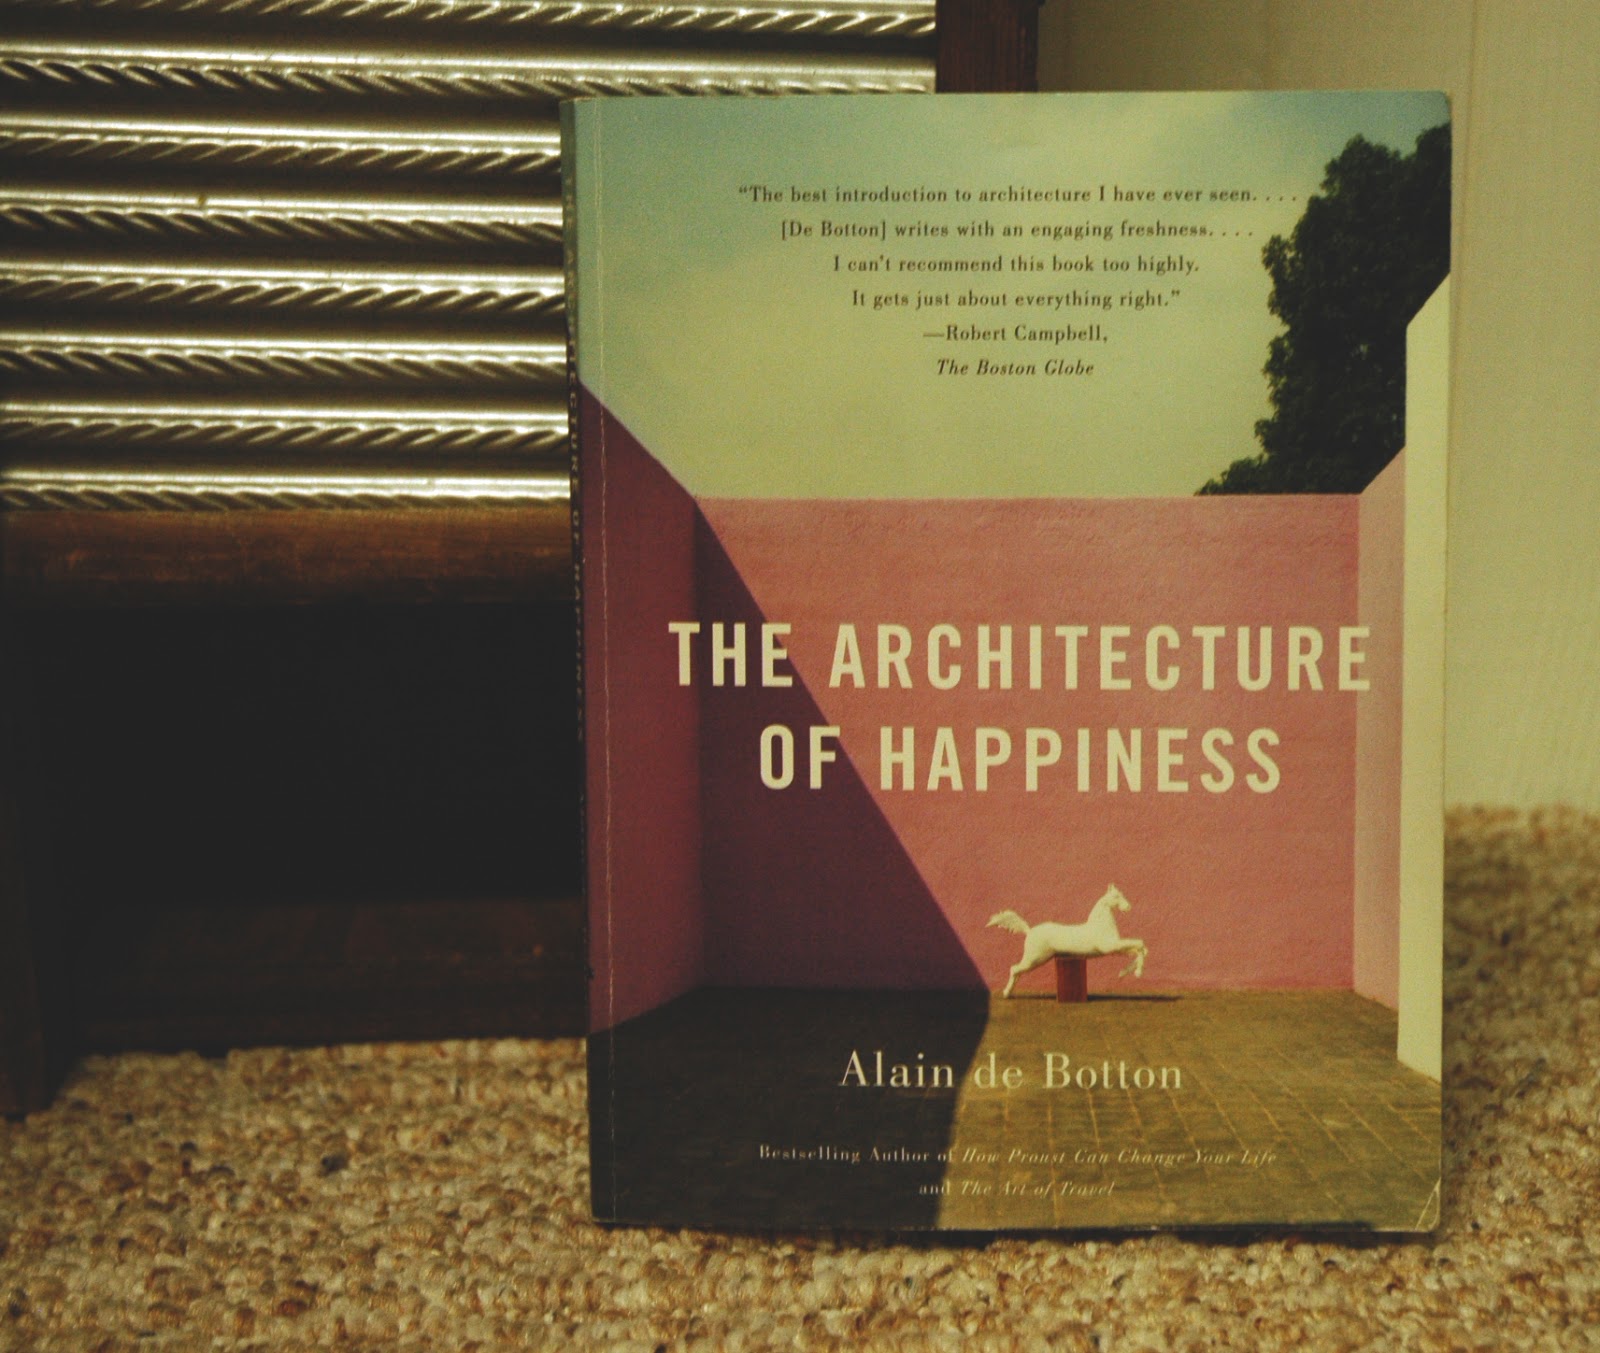 The architecture for Happiness. Source: https://architectureproductsimage.blogspot.com/